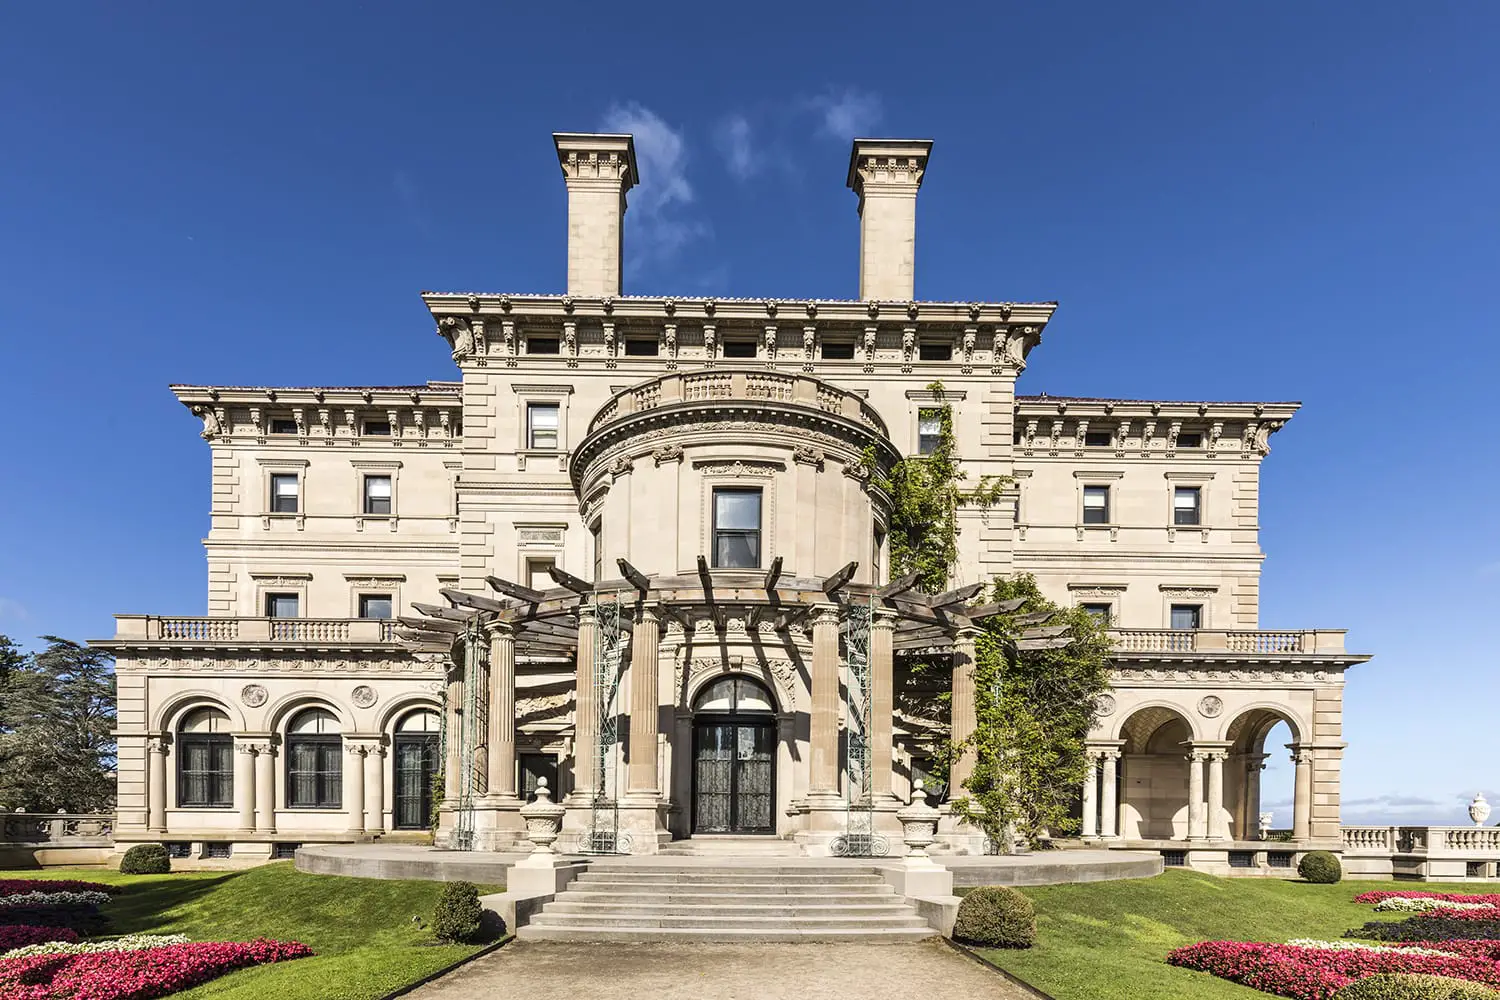 the breakers is an old Newport Vanderbilt Mansion located on Ochre Point Avenue